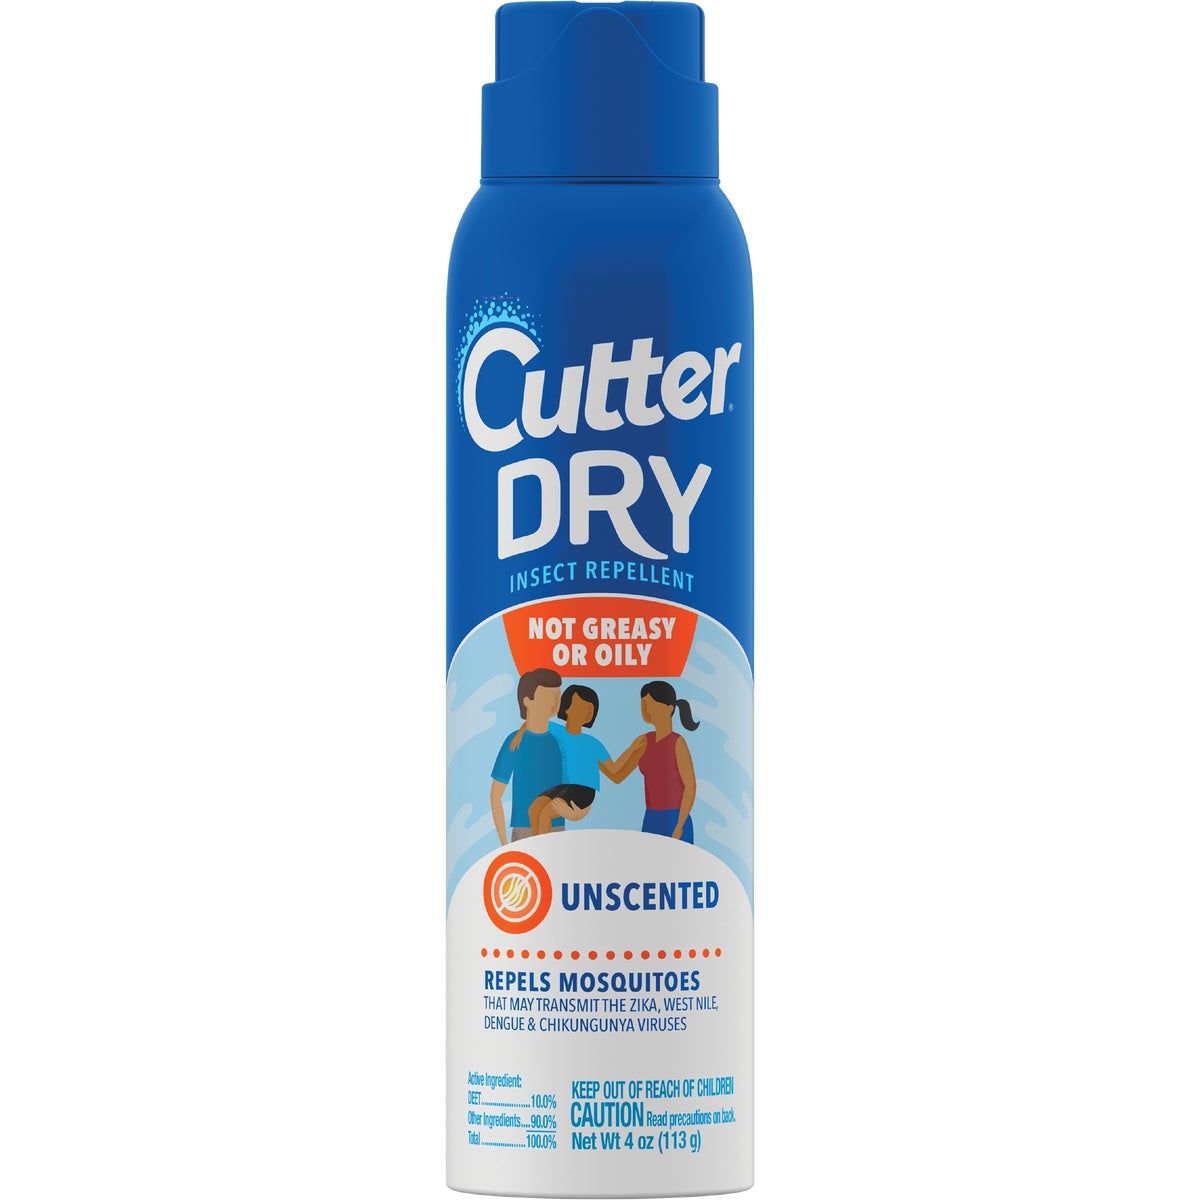 Item 701197, Dry formula insect repellent.